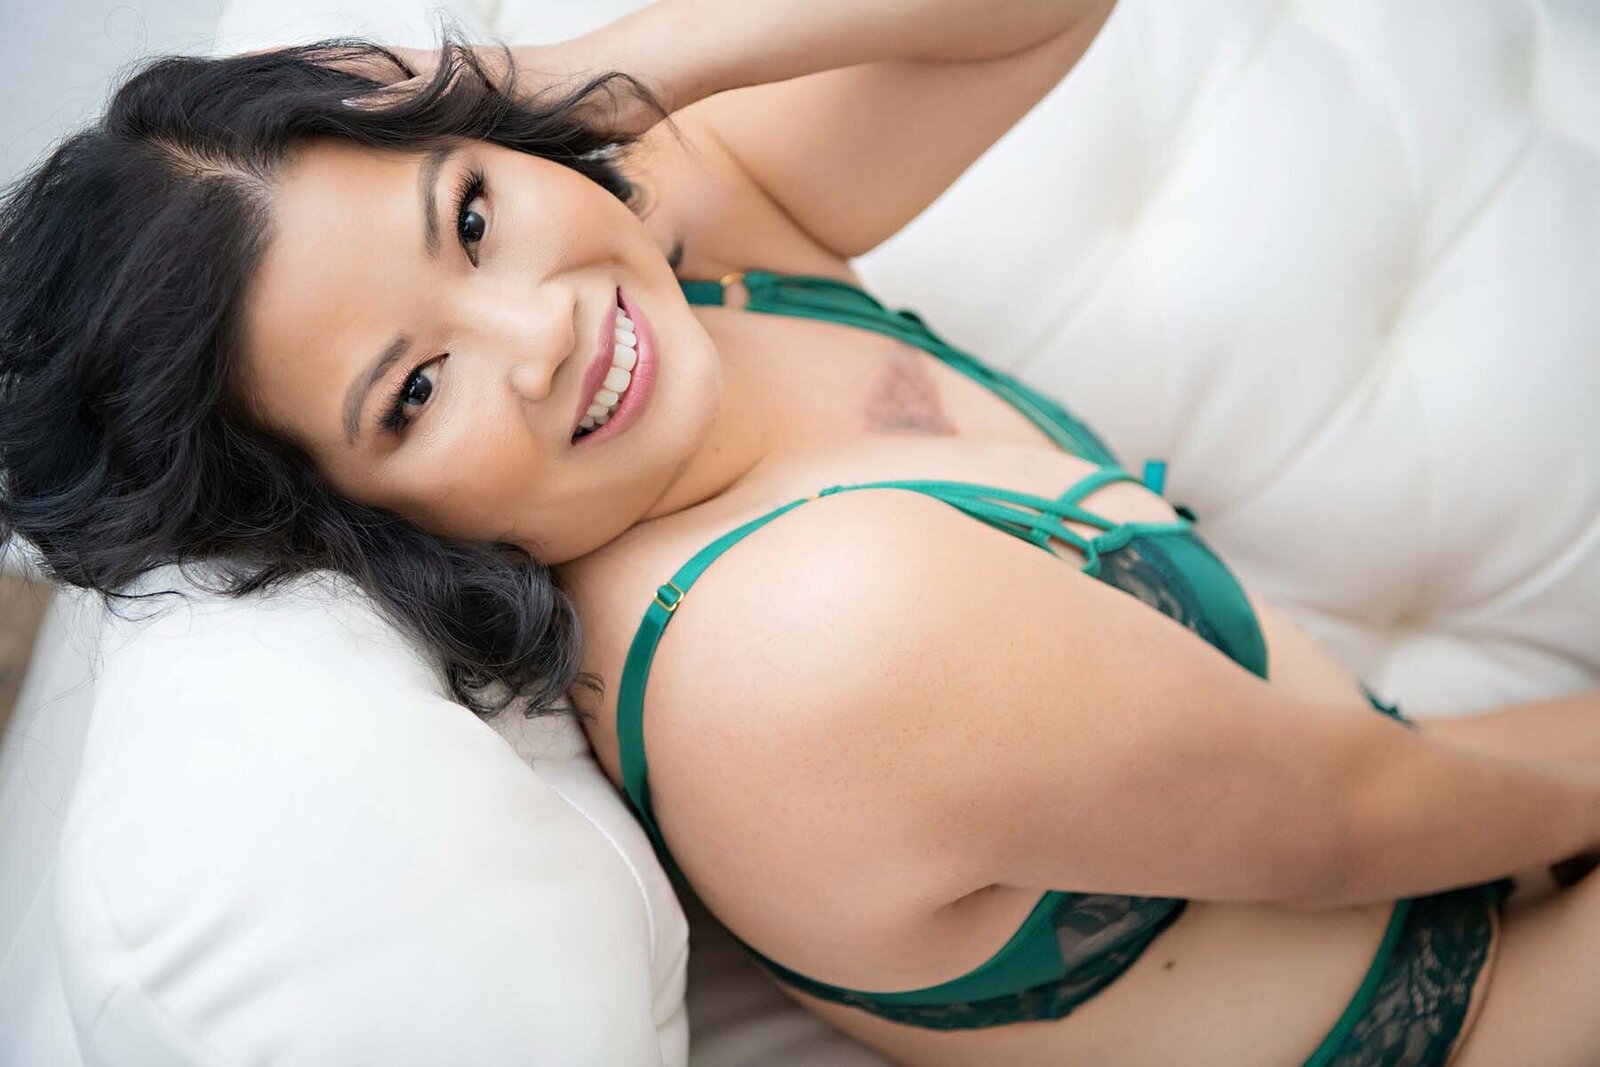 Asian woman smiling in emerald lingerie